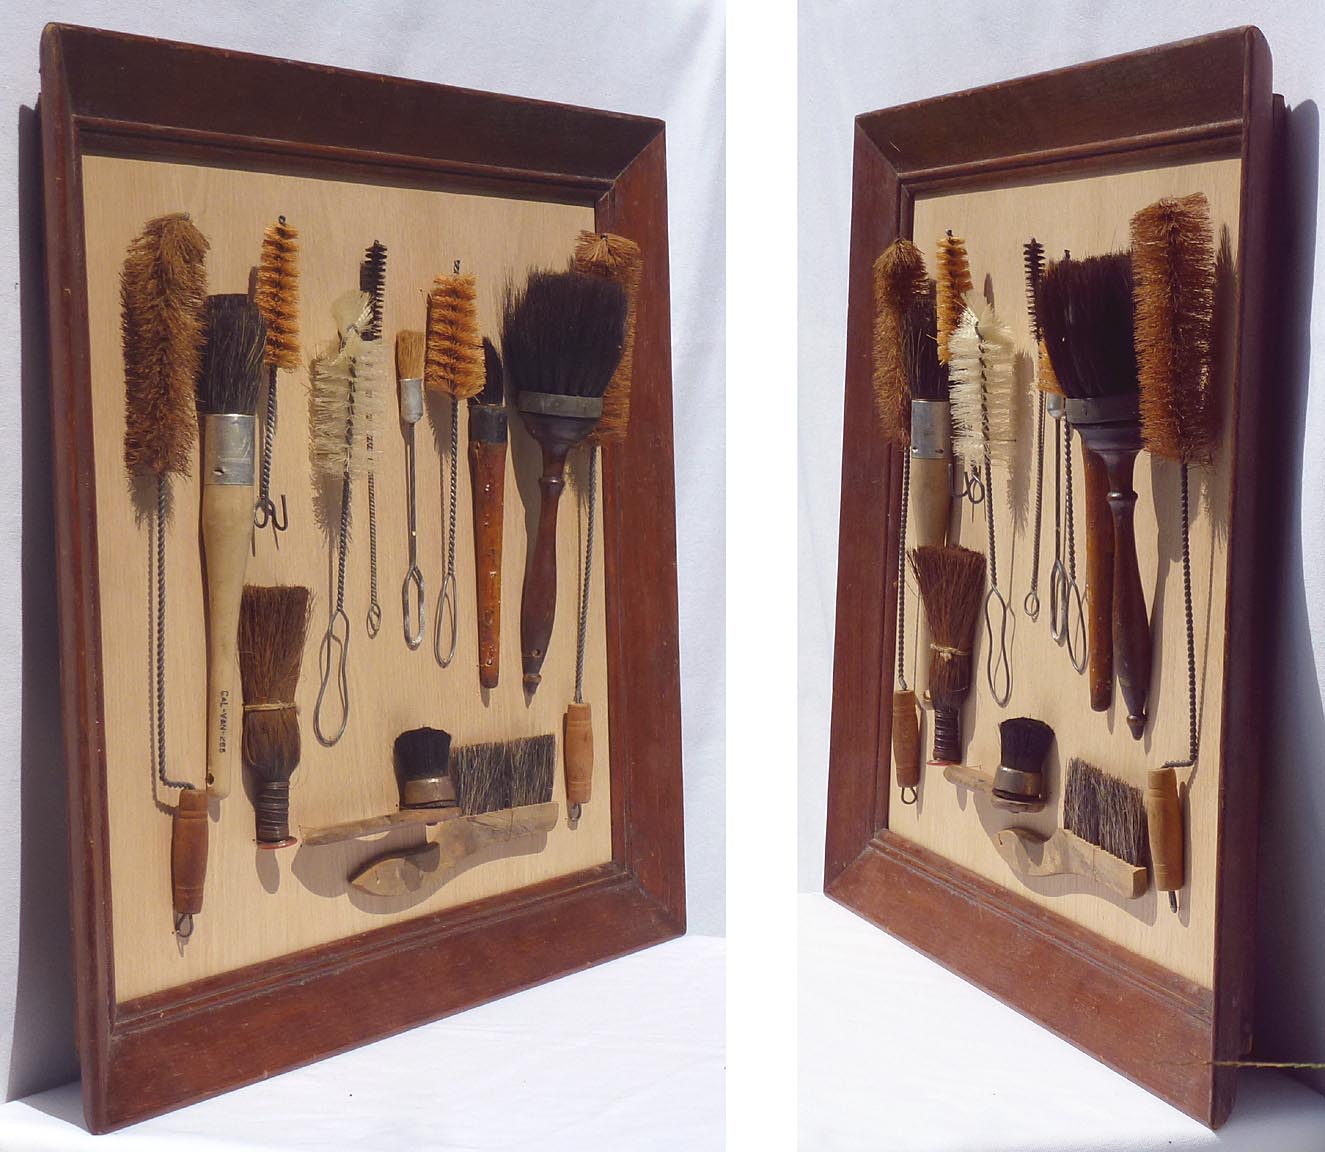 Framed collection of brushes